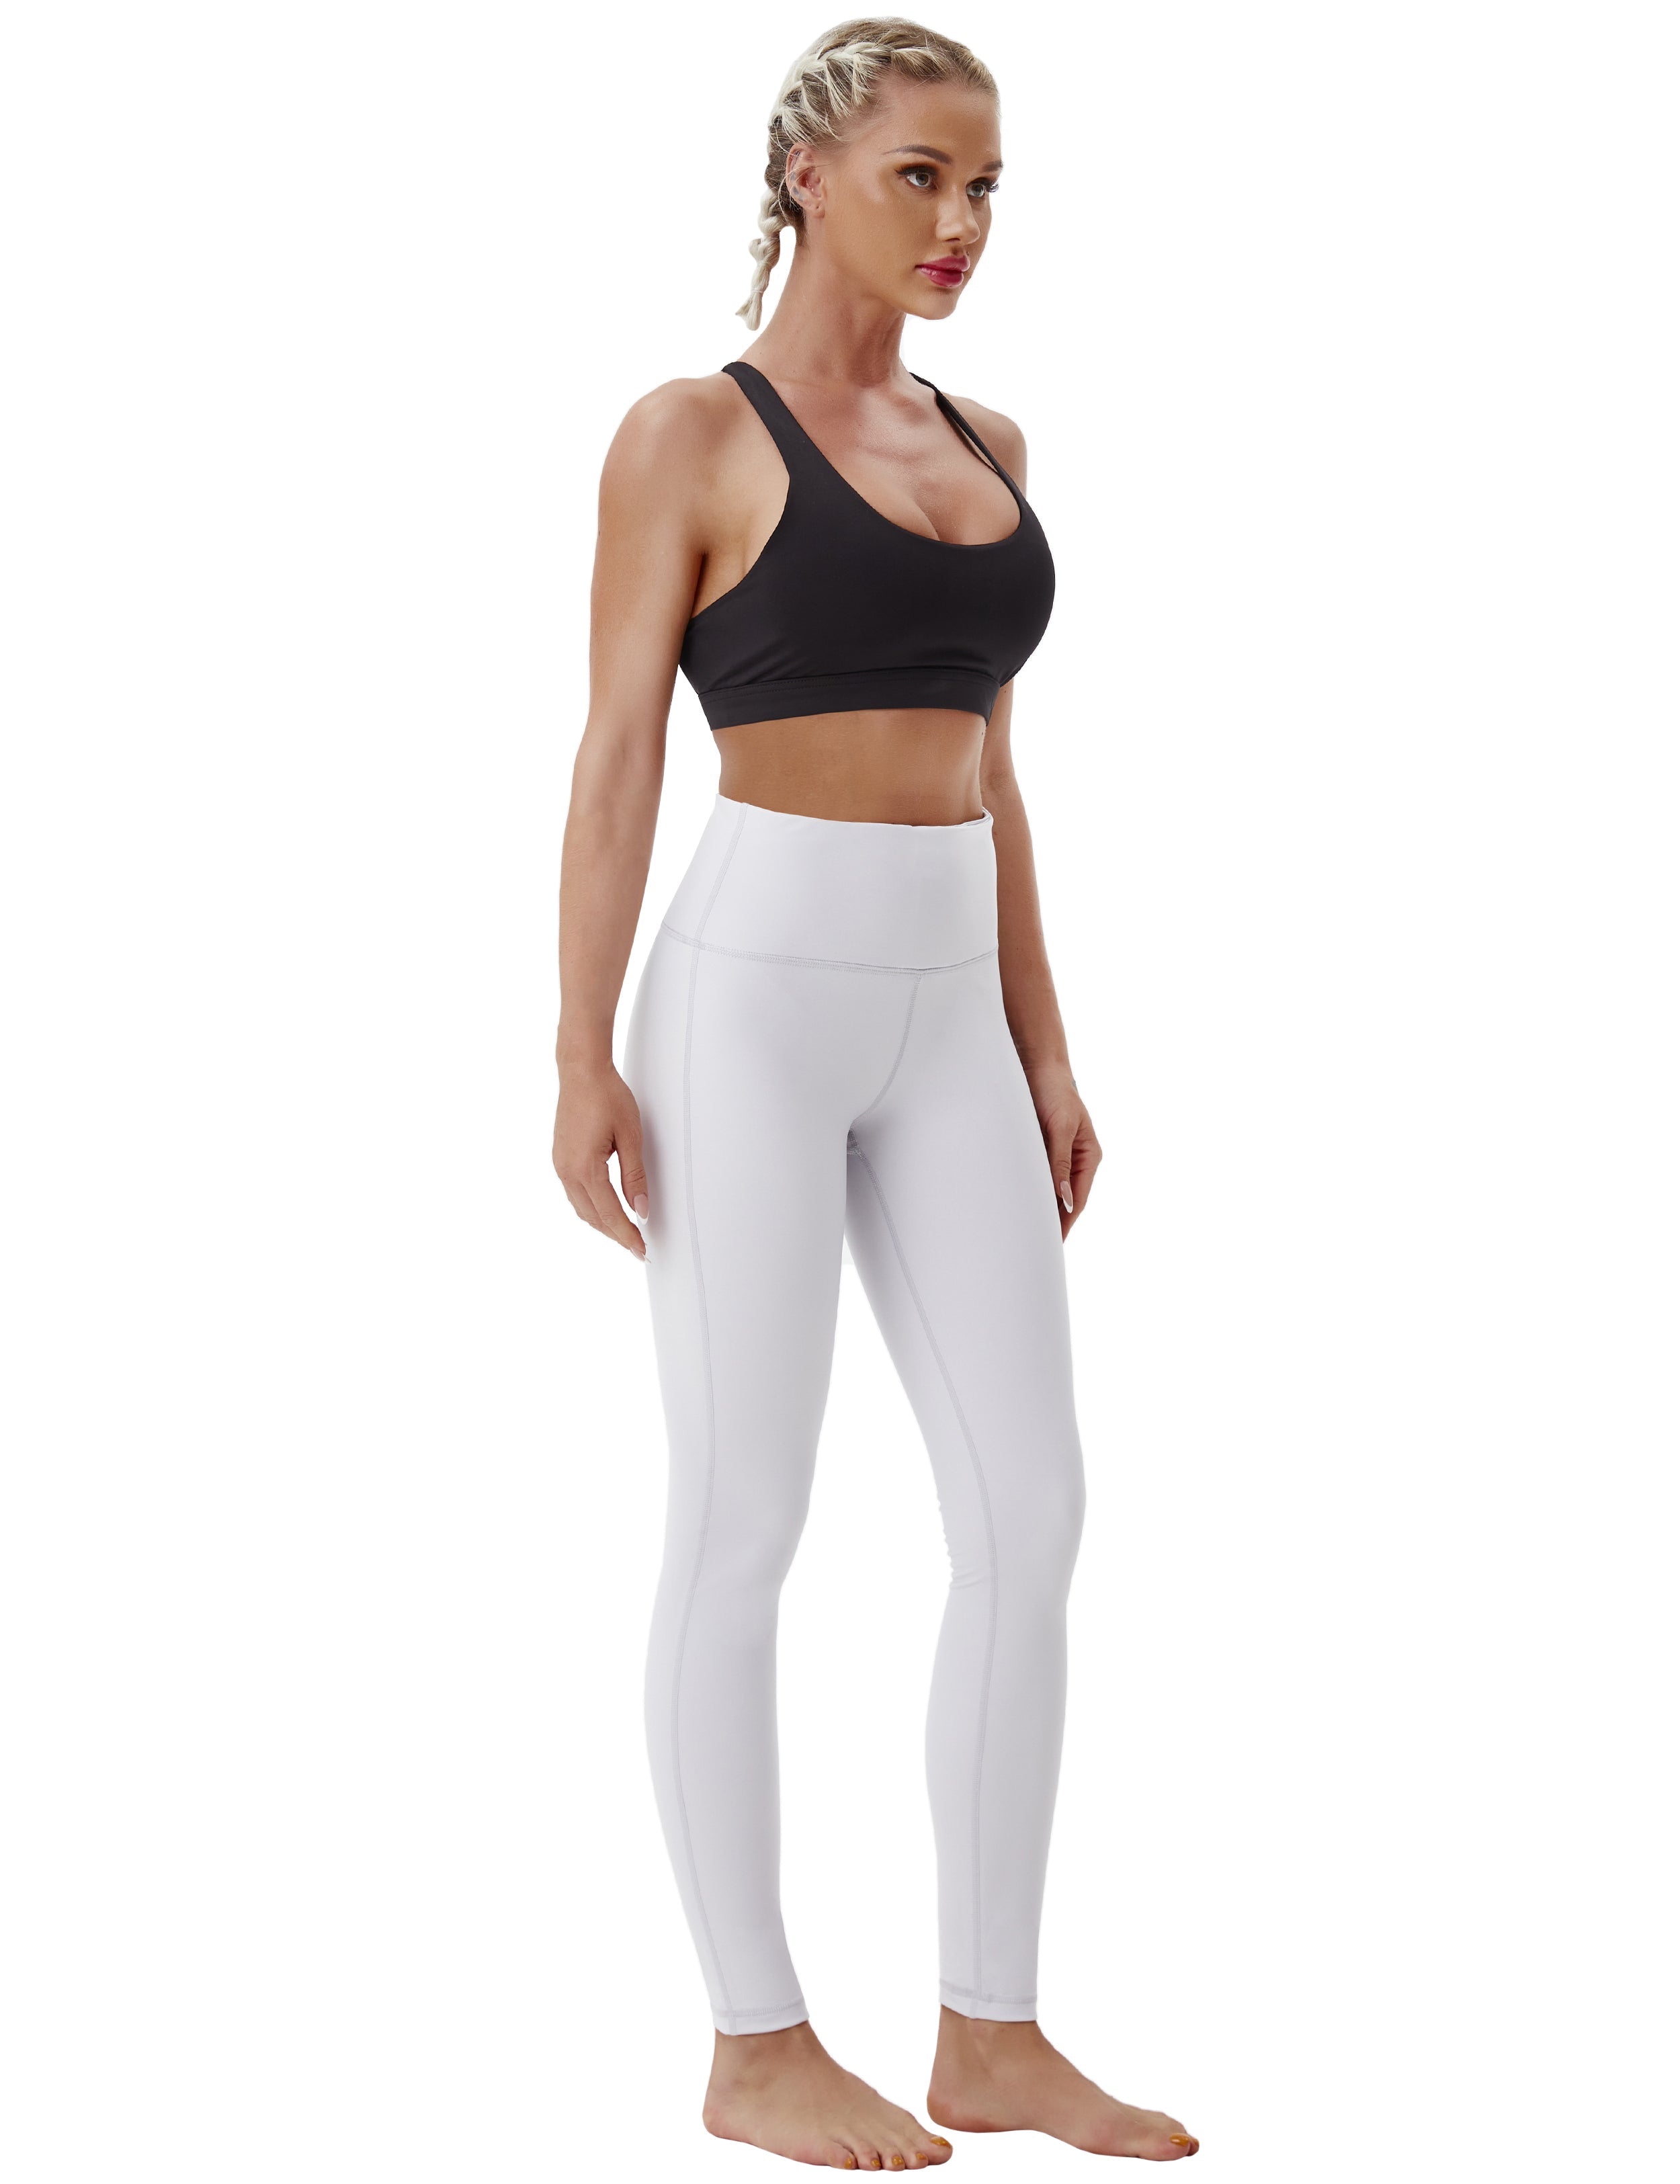 High Waist Side Line Pilates Pants lightgray Side Line is Make Your Legs Look Longer and Thinner 75%Nylon/25%Spandex Fabric doesn't attract lint easily 4-way stretch No see-through Moisture-wicking Tummy control Inner pocket Two lengths